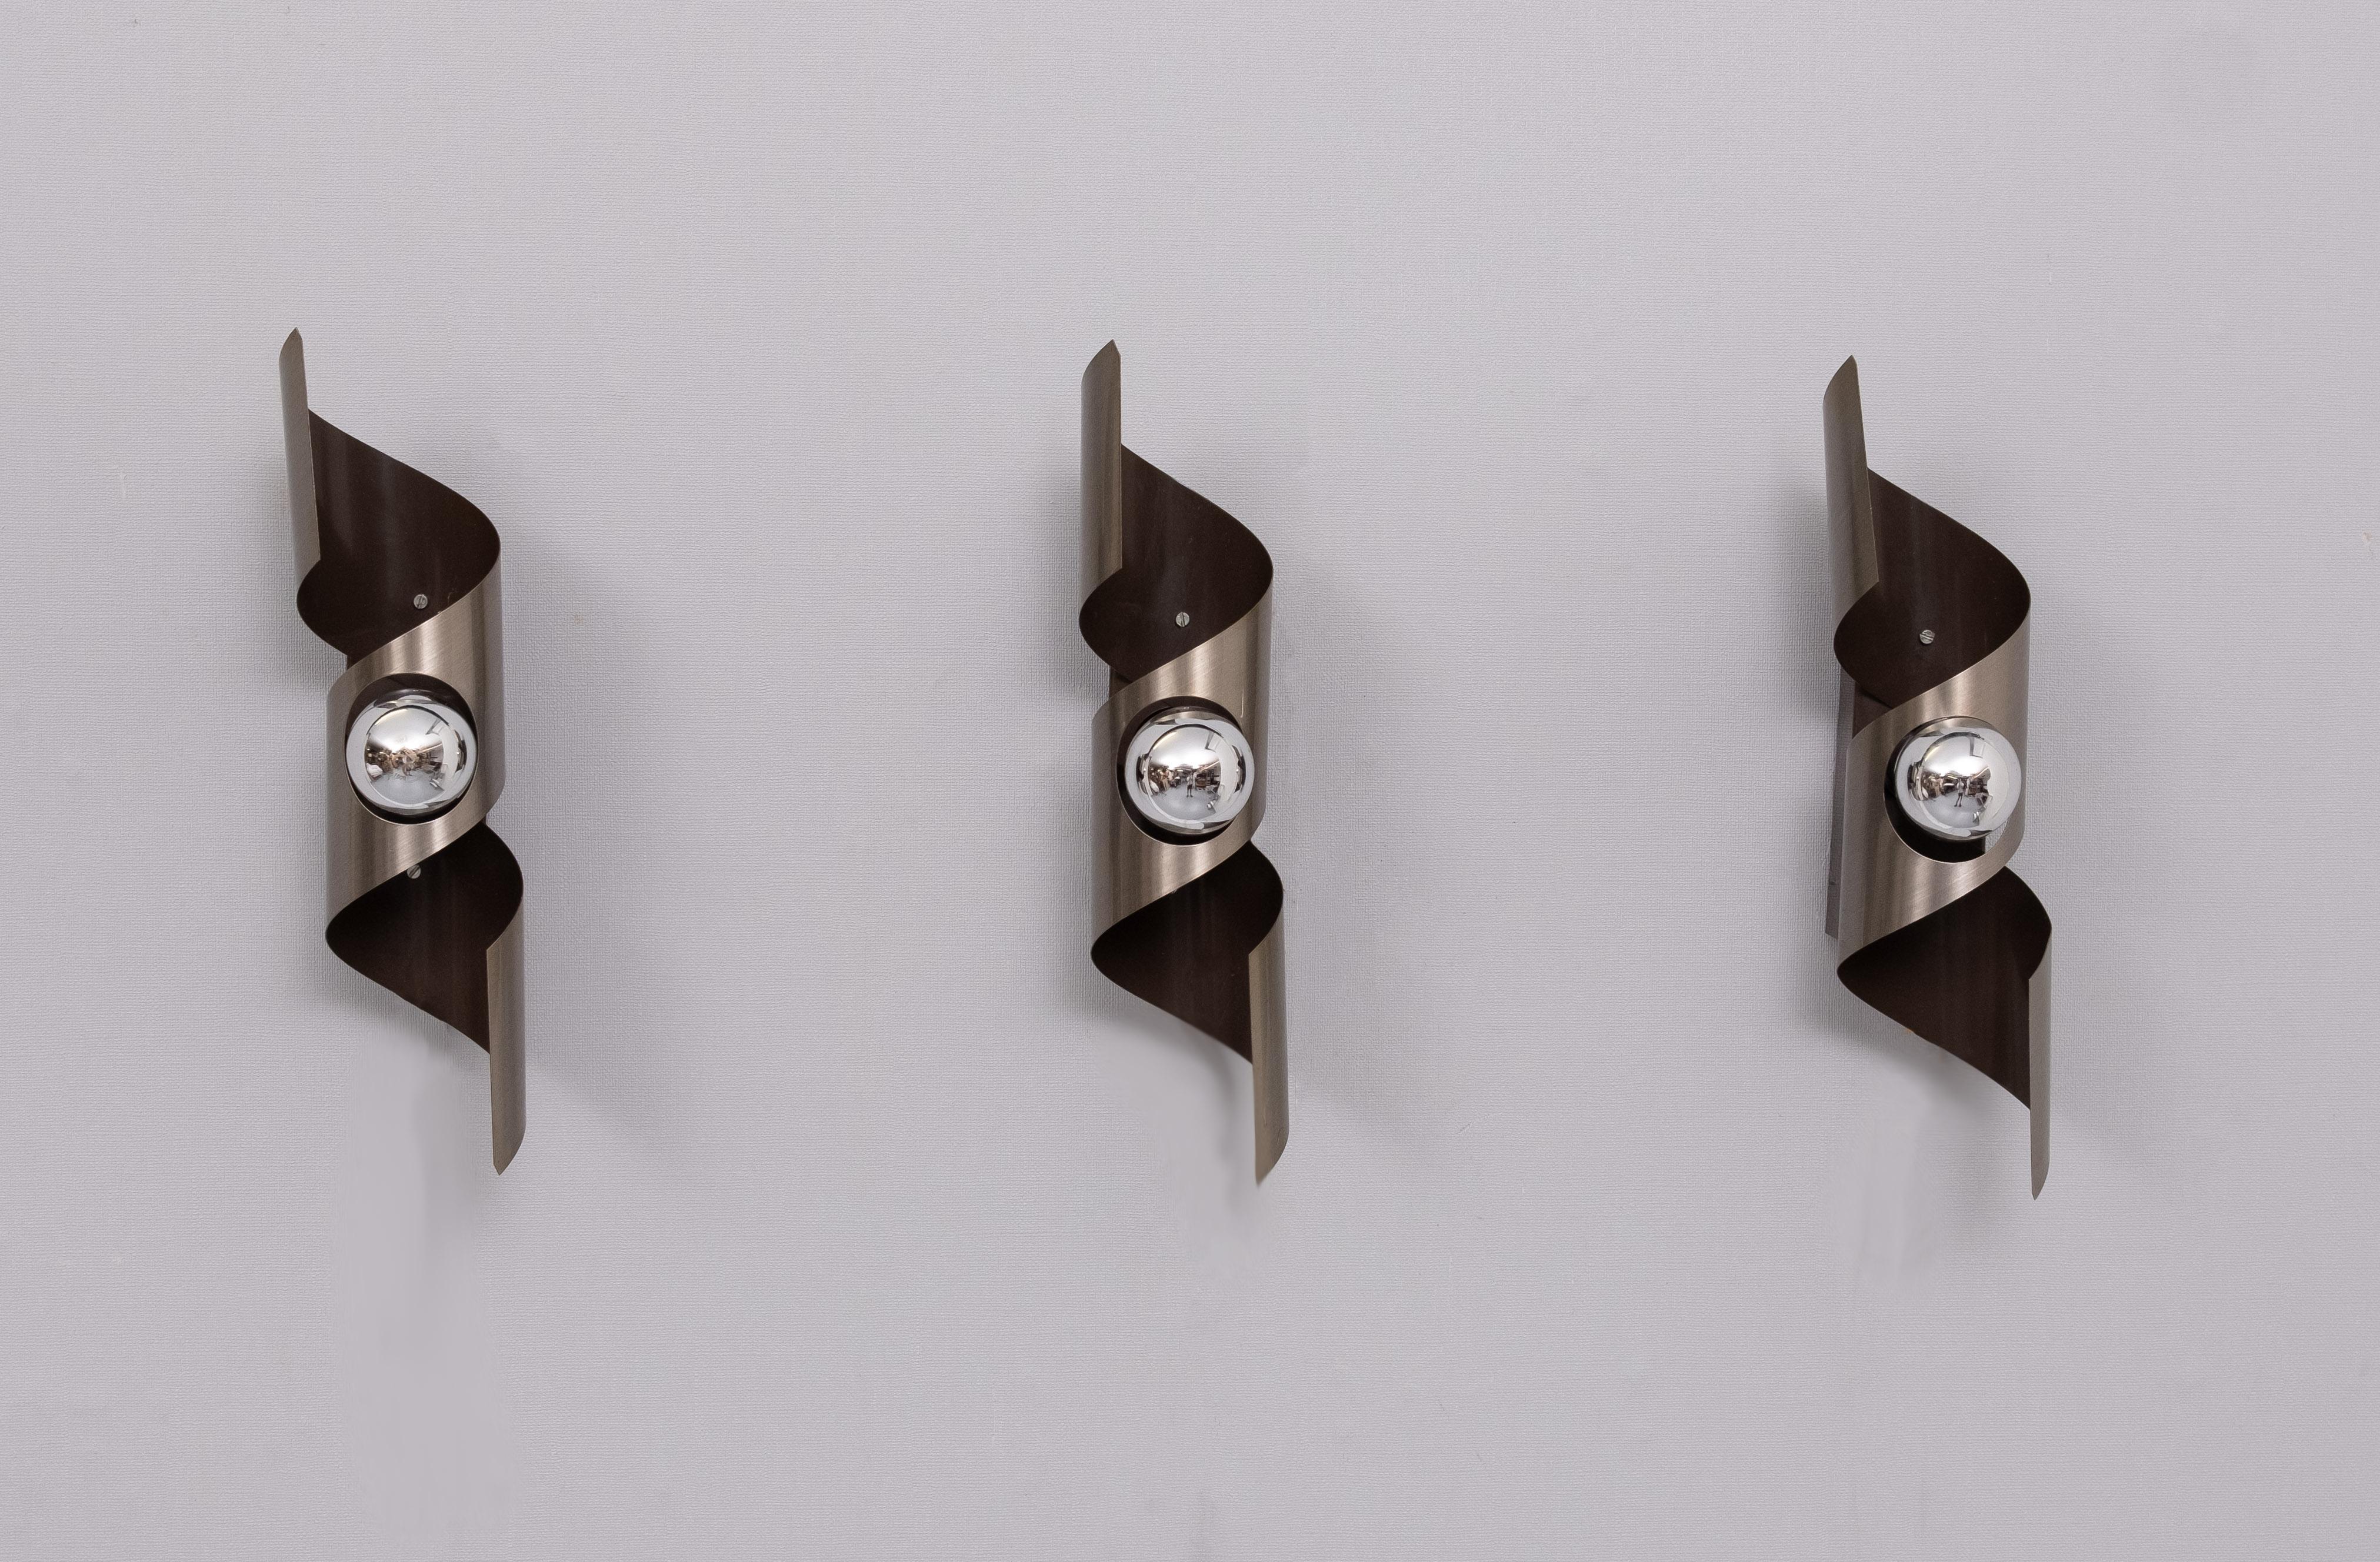 set of Three Space Ace style ,Wall Sconces .Mocha Brown color .
with aluminum . model  ''Wokkel'' attributed to Raak Amsterdam .
1970s    Small E14 socket needed.  Very nice light effect when lit .